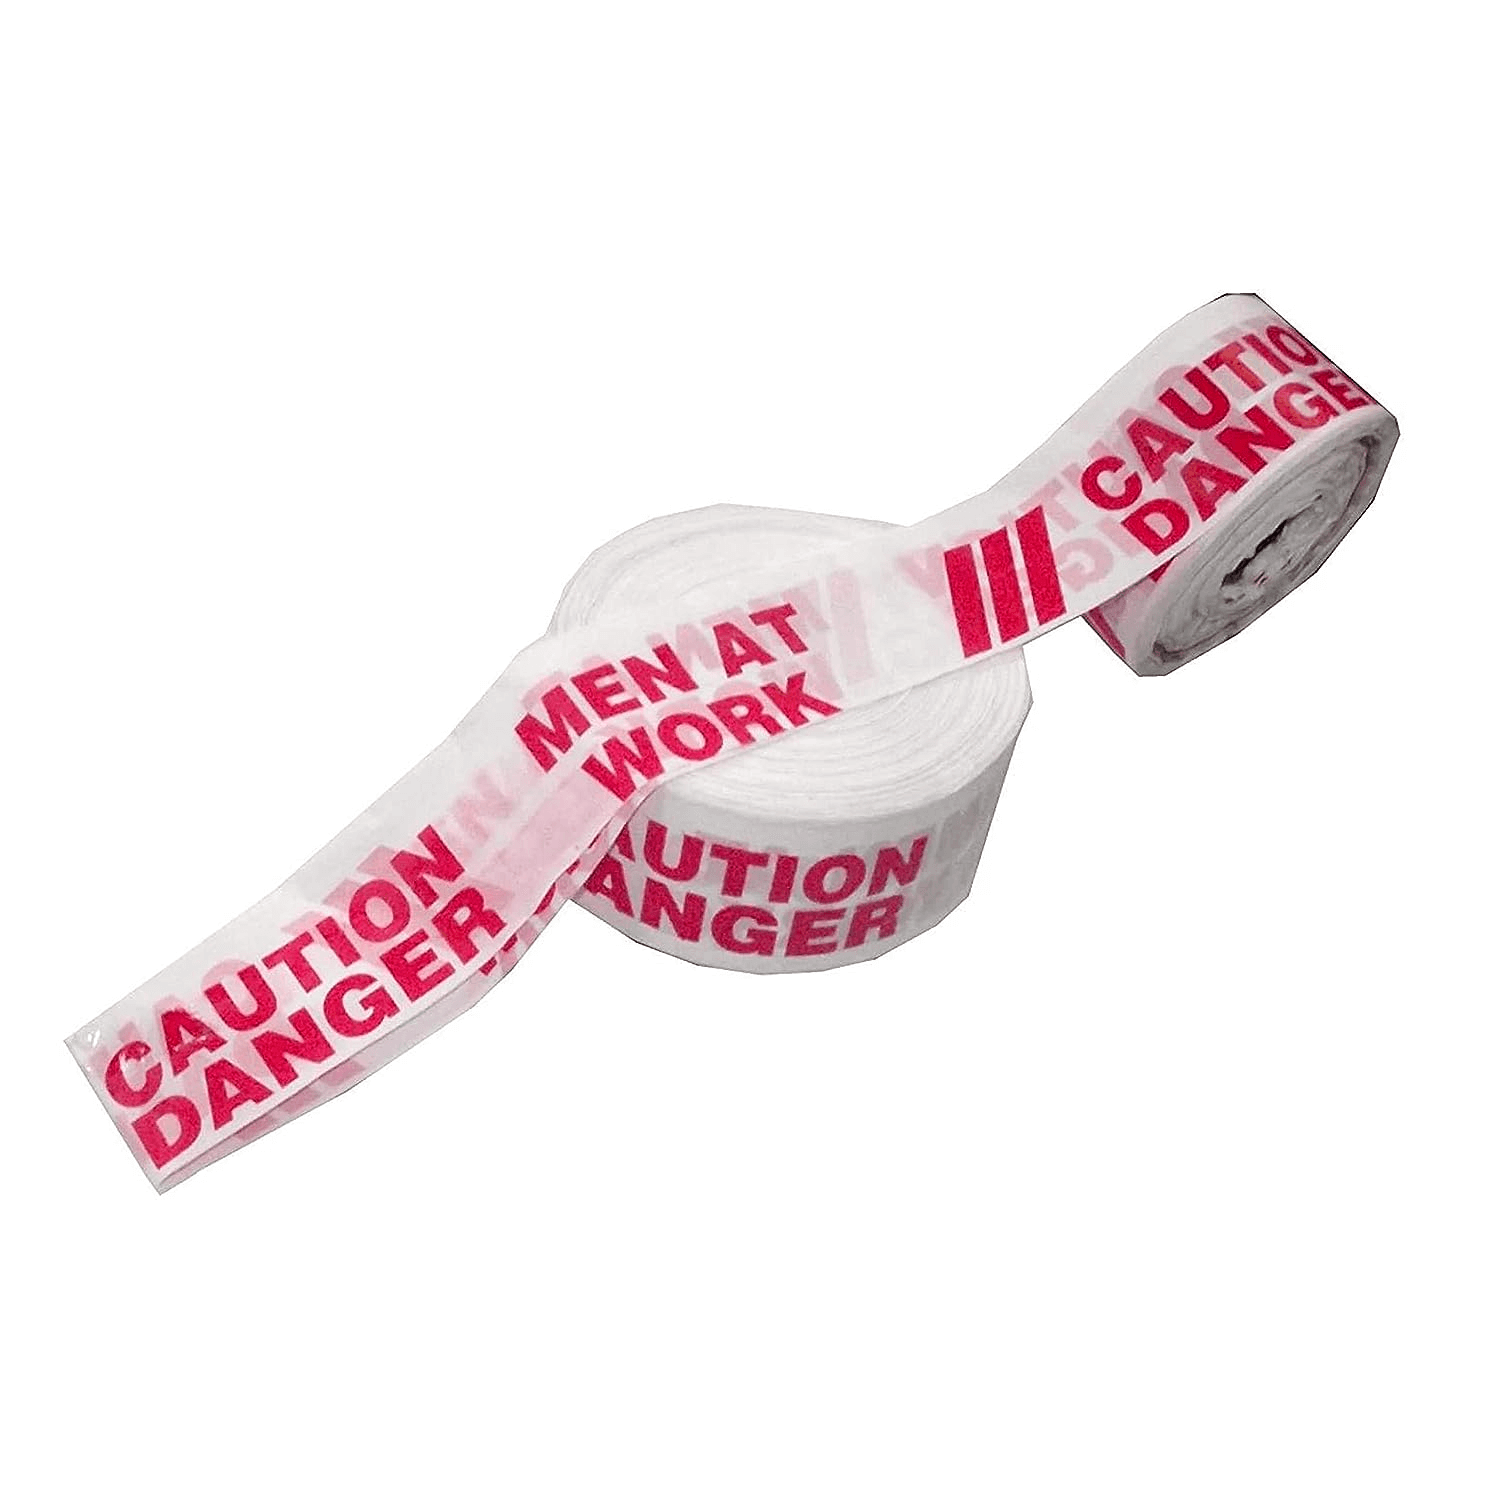 robustt-caution-tape-3-inches-x-130-mtr-white-red-pvc-material-barrication-tape-weather-resistant-warning-tape-pack-of-1